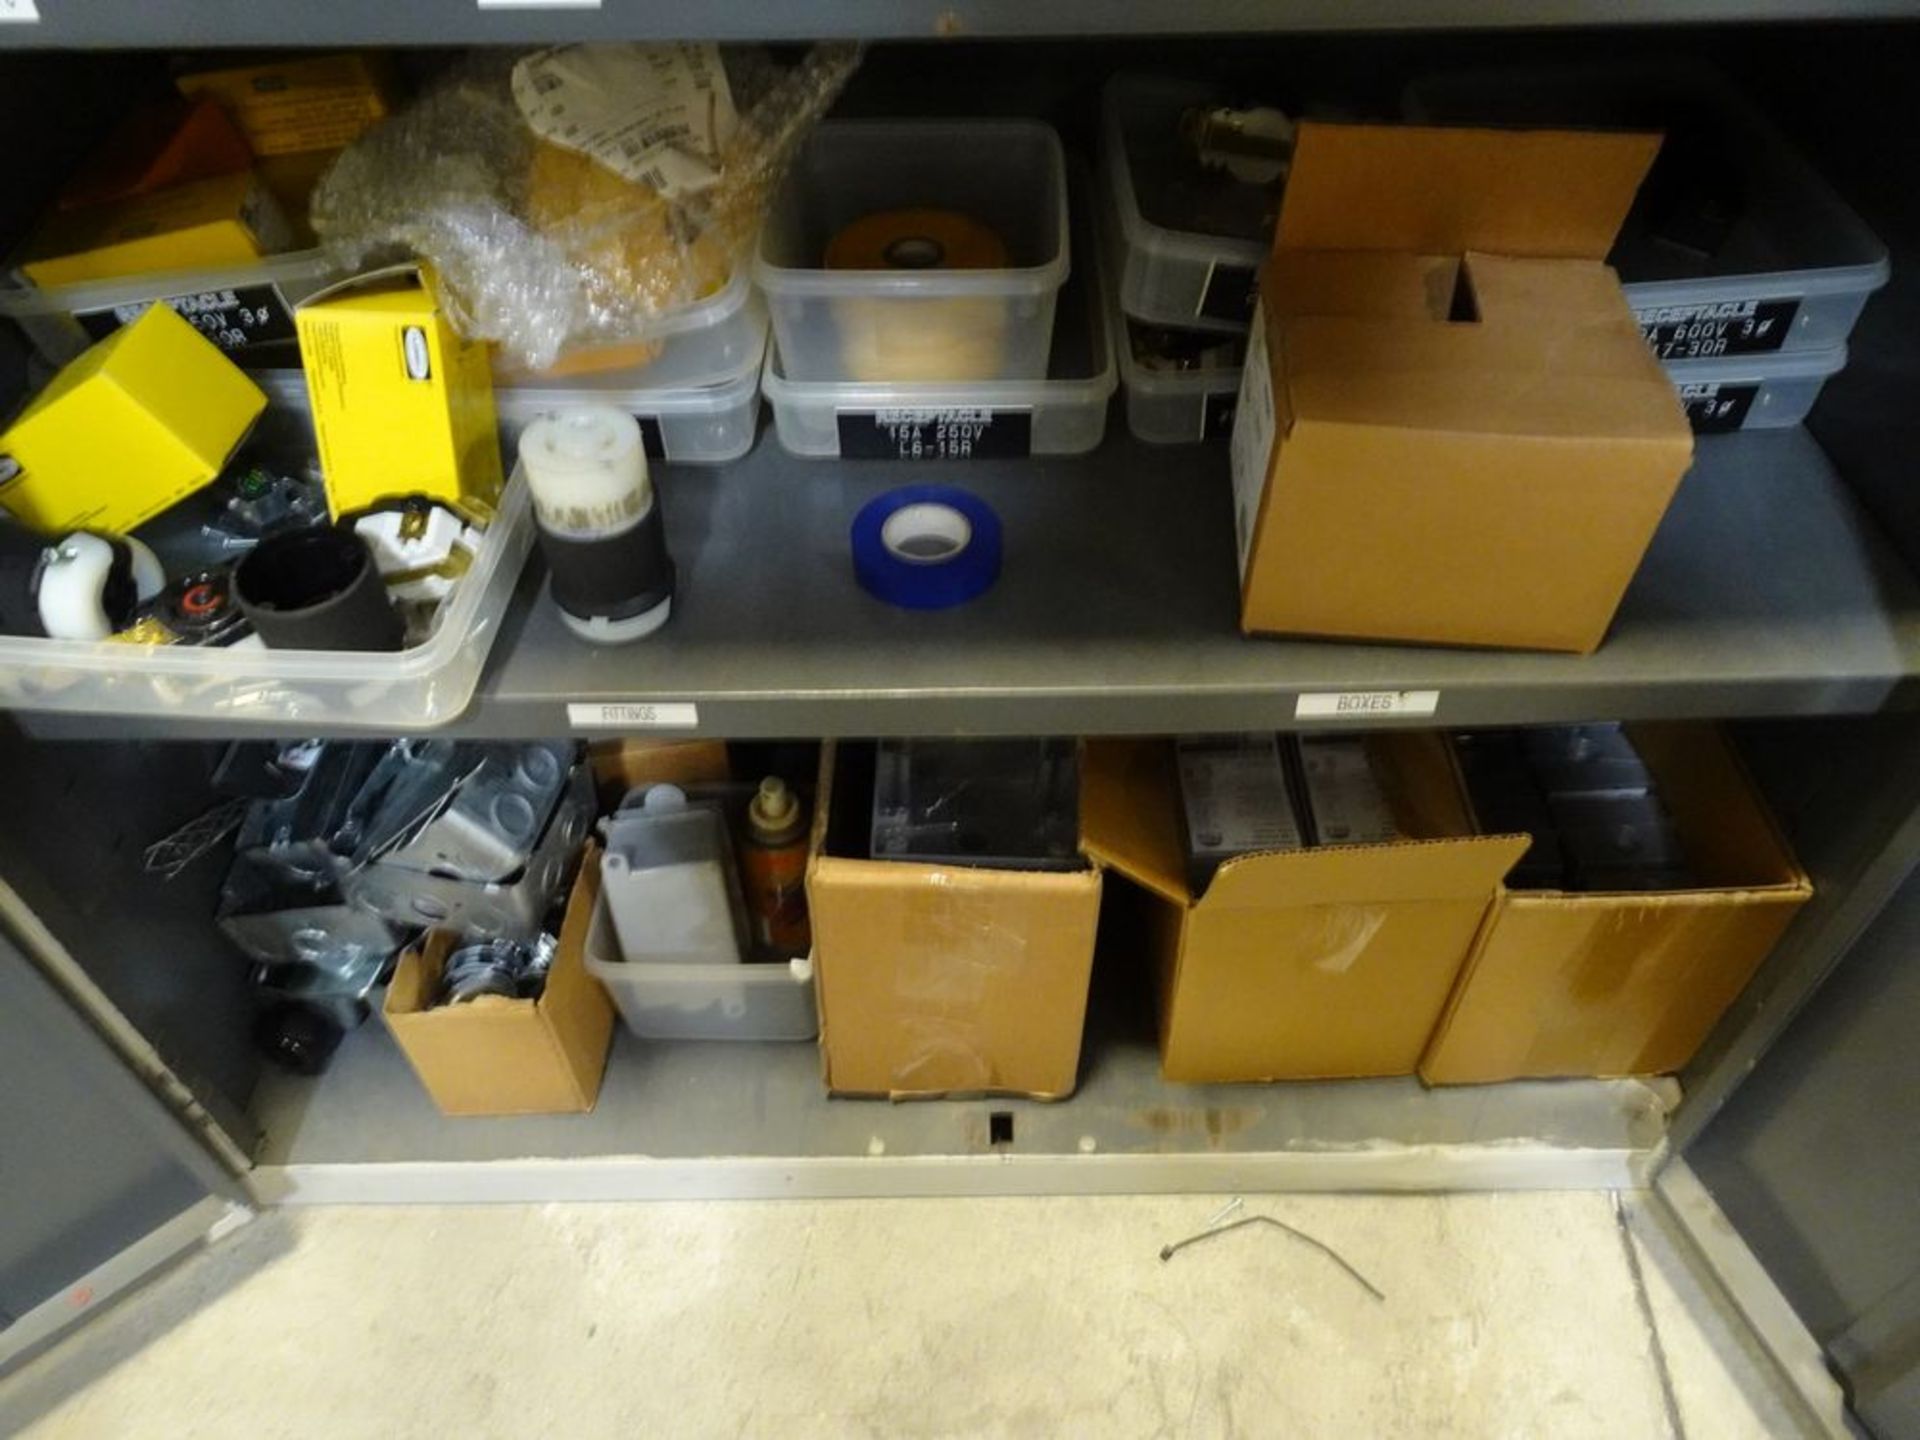 2 DOOR CABINET W/ASSORTED PRODUCT, PLUGS, ELECTRICAL, FITTINGS, ETC. - Image 4 of 4